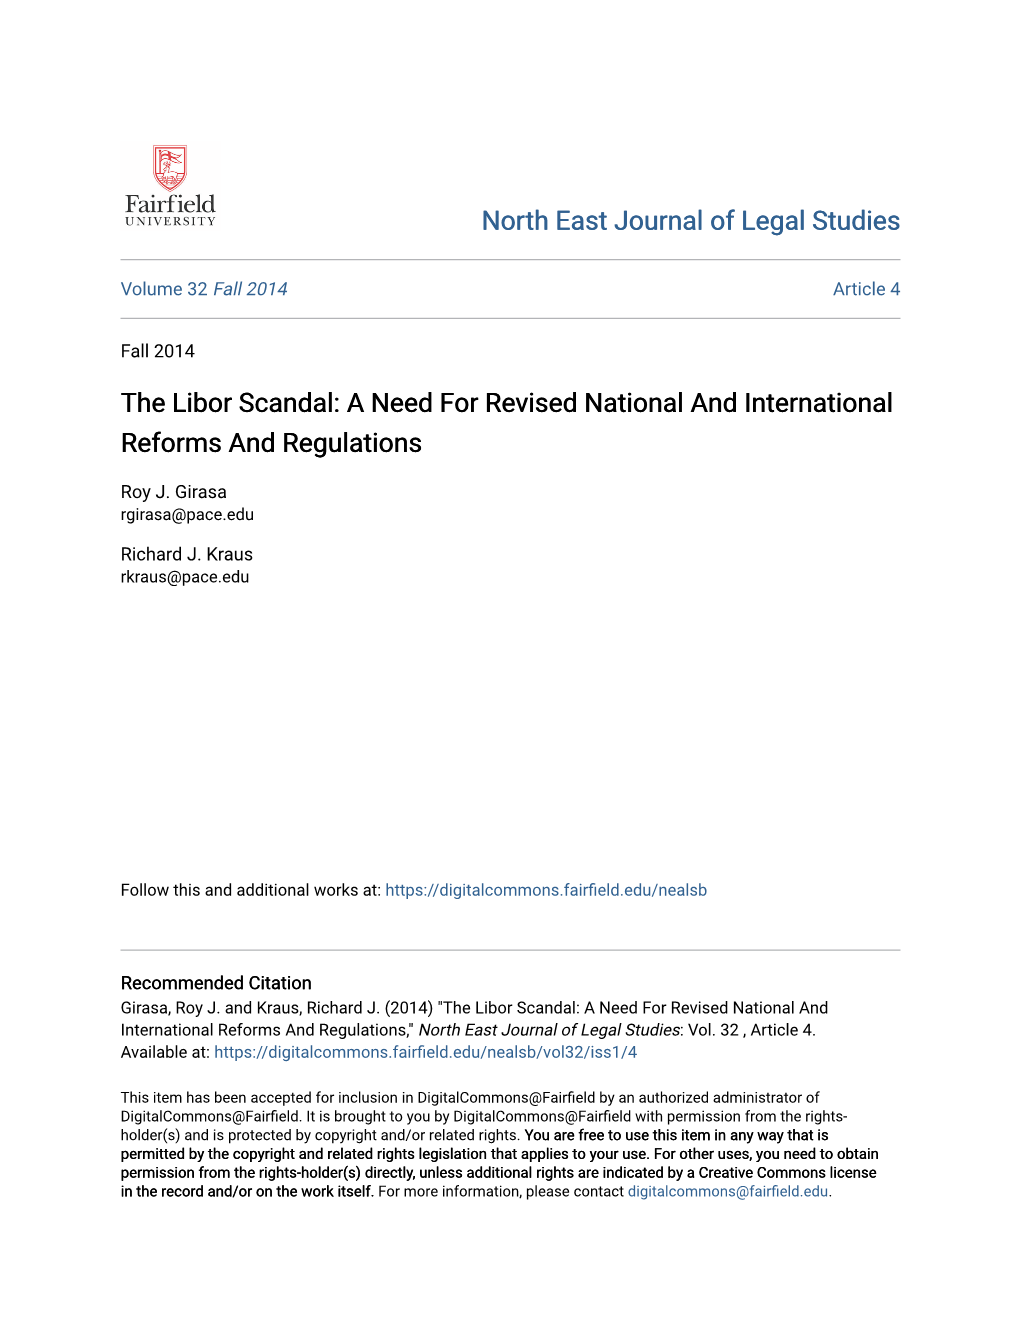 The Libor Scandal: a Need for Revised National and International Reforms and Regulations